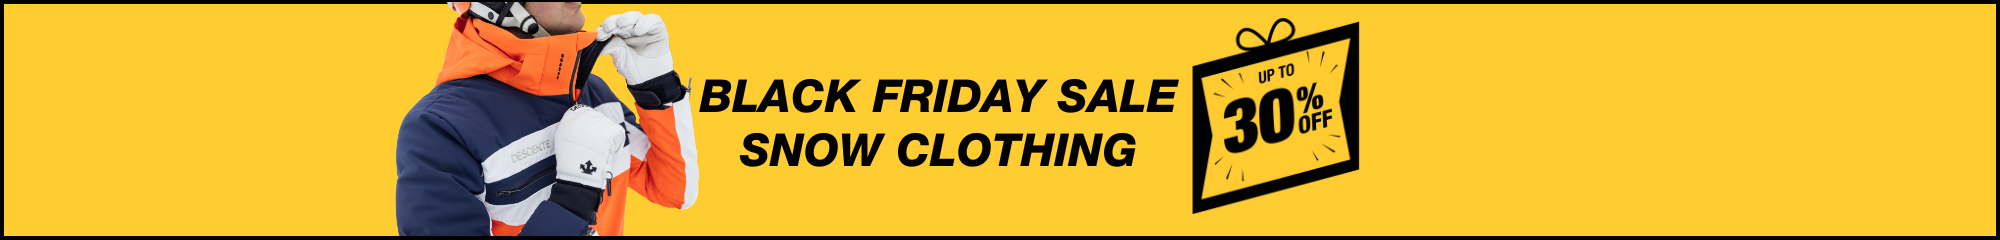 Black Friday Deals on Men's Ski Clothing & Mid Layers